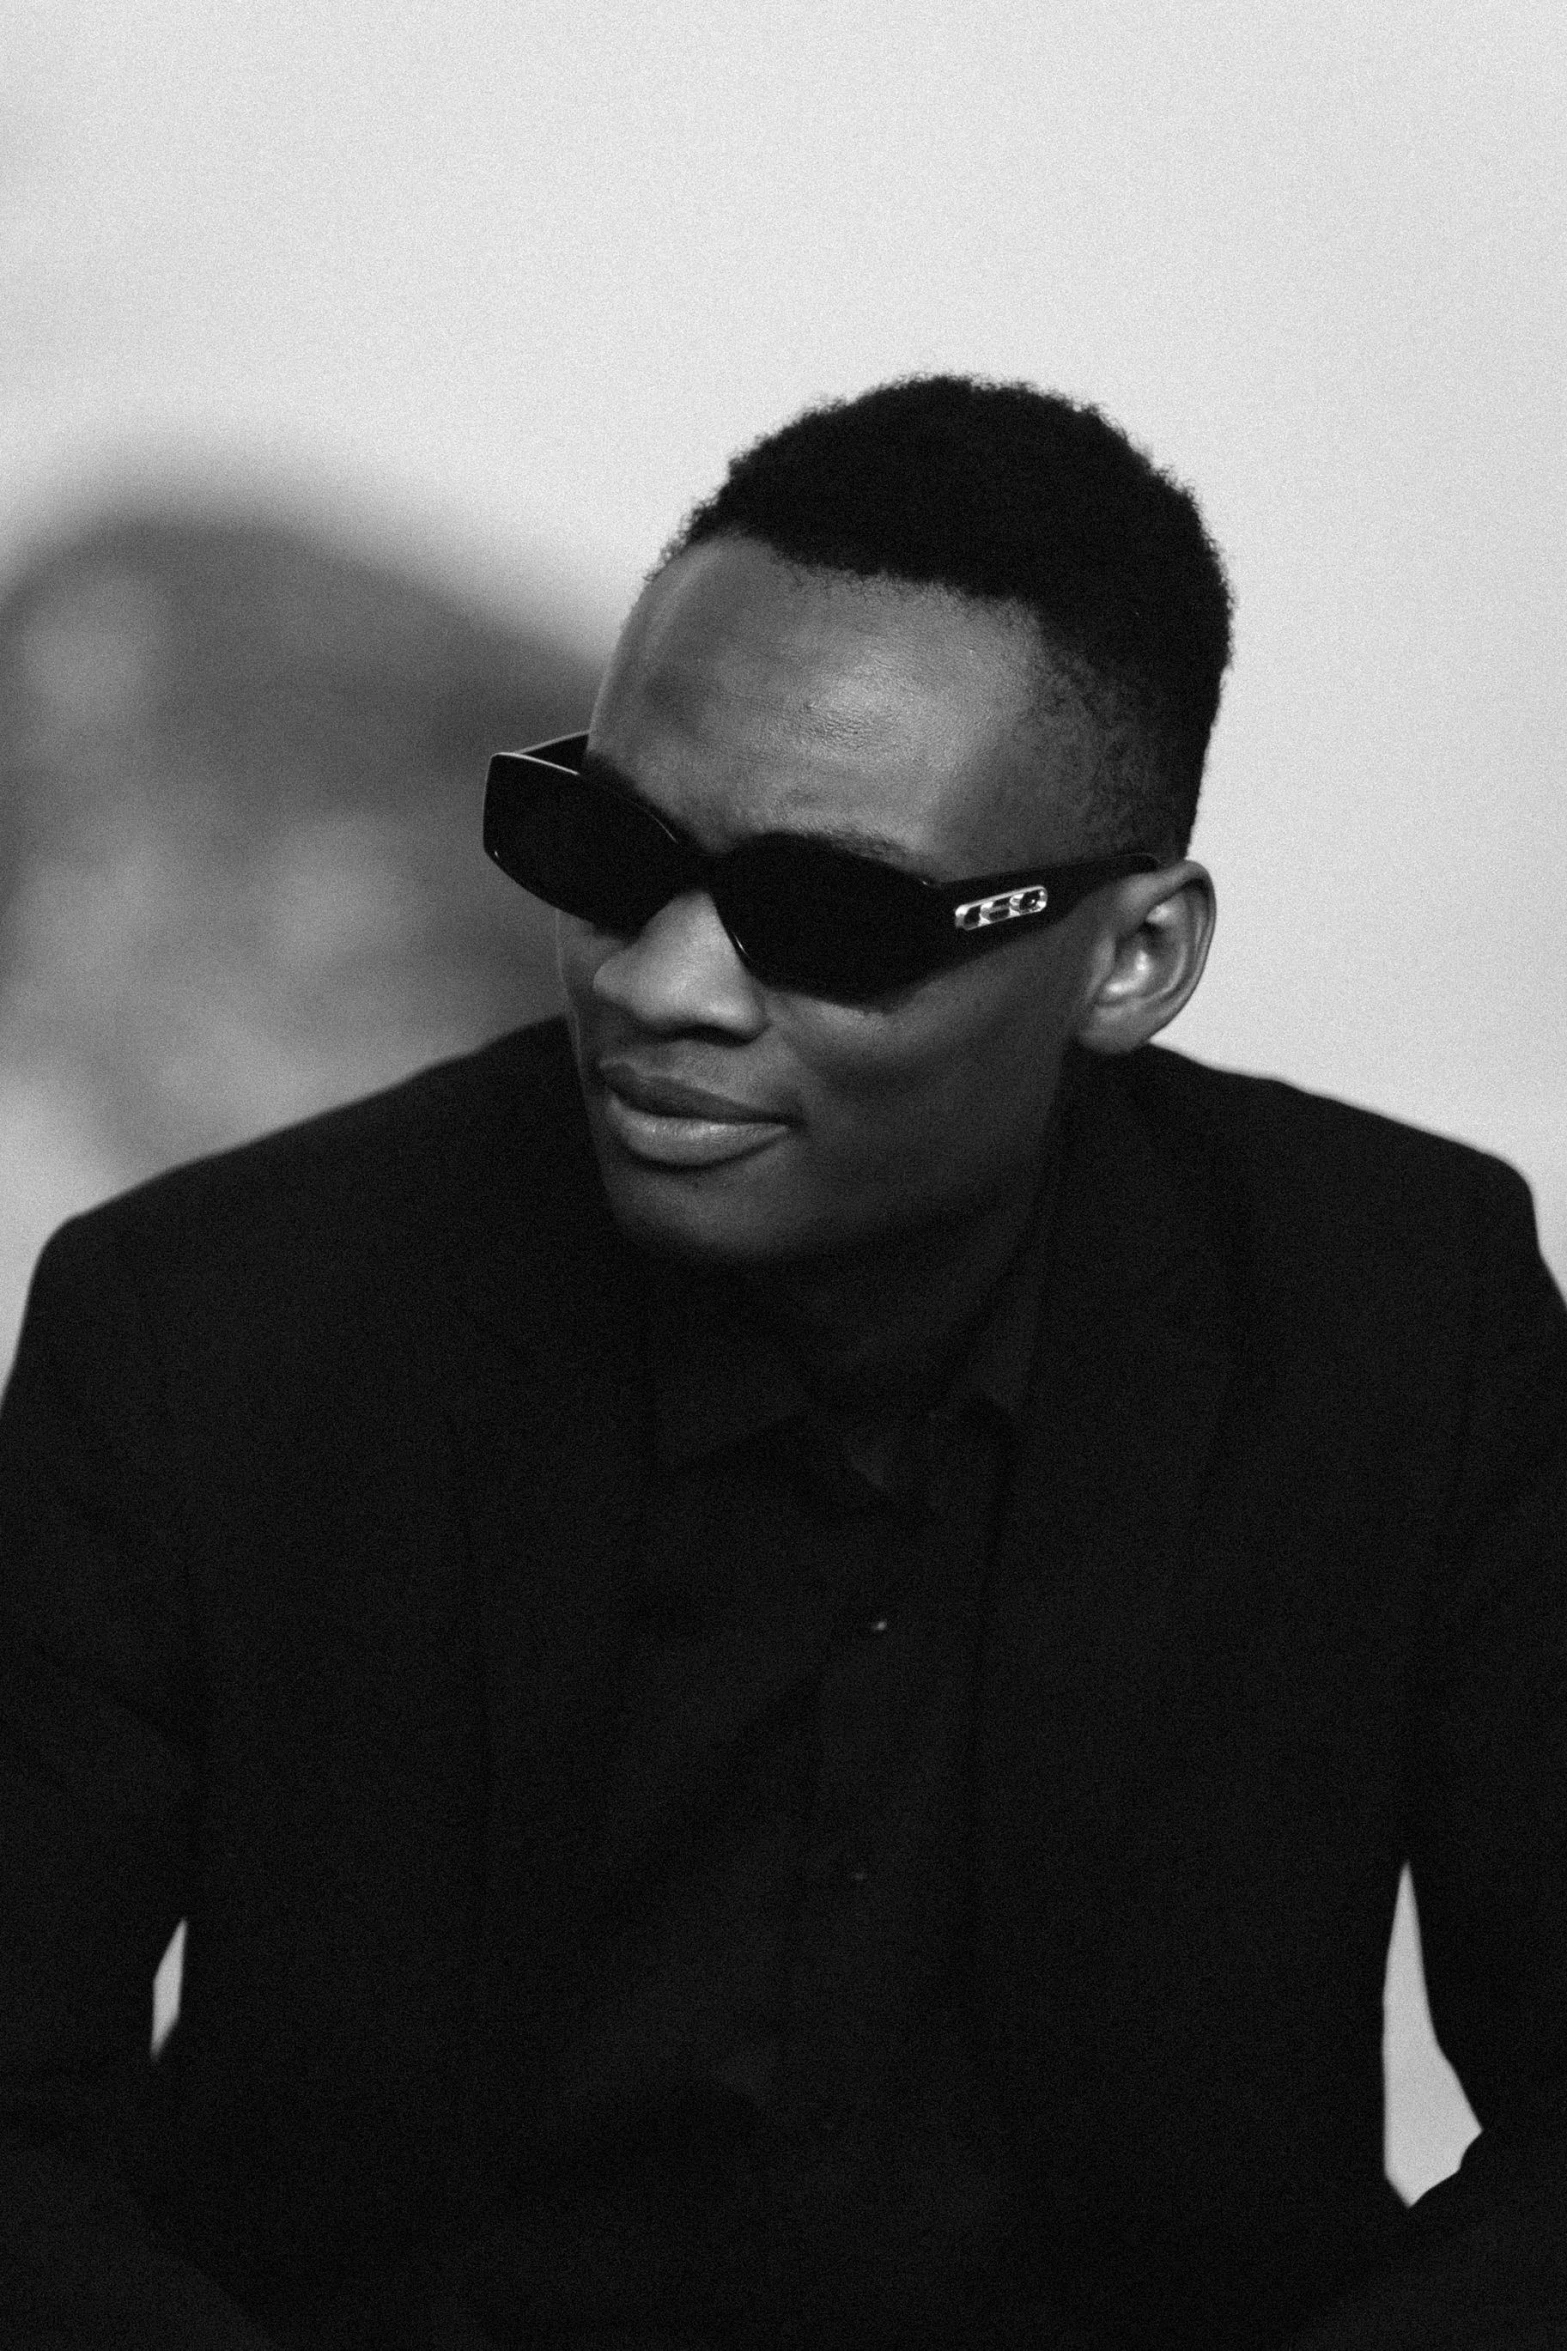 man in black suit wearing sunglasses with black shadow